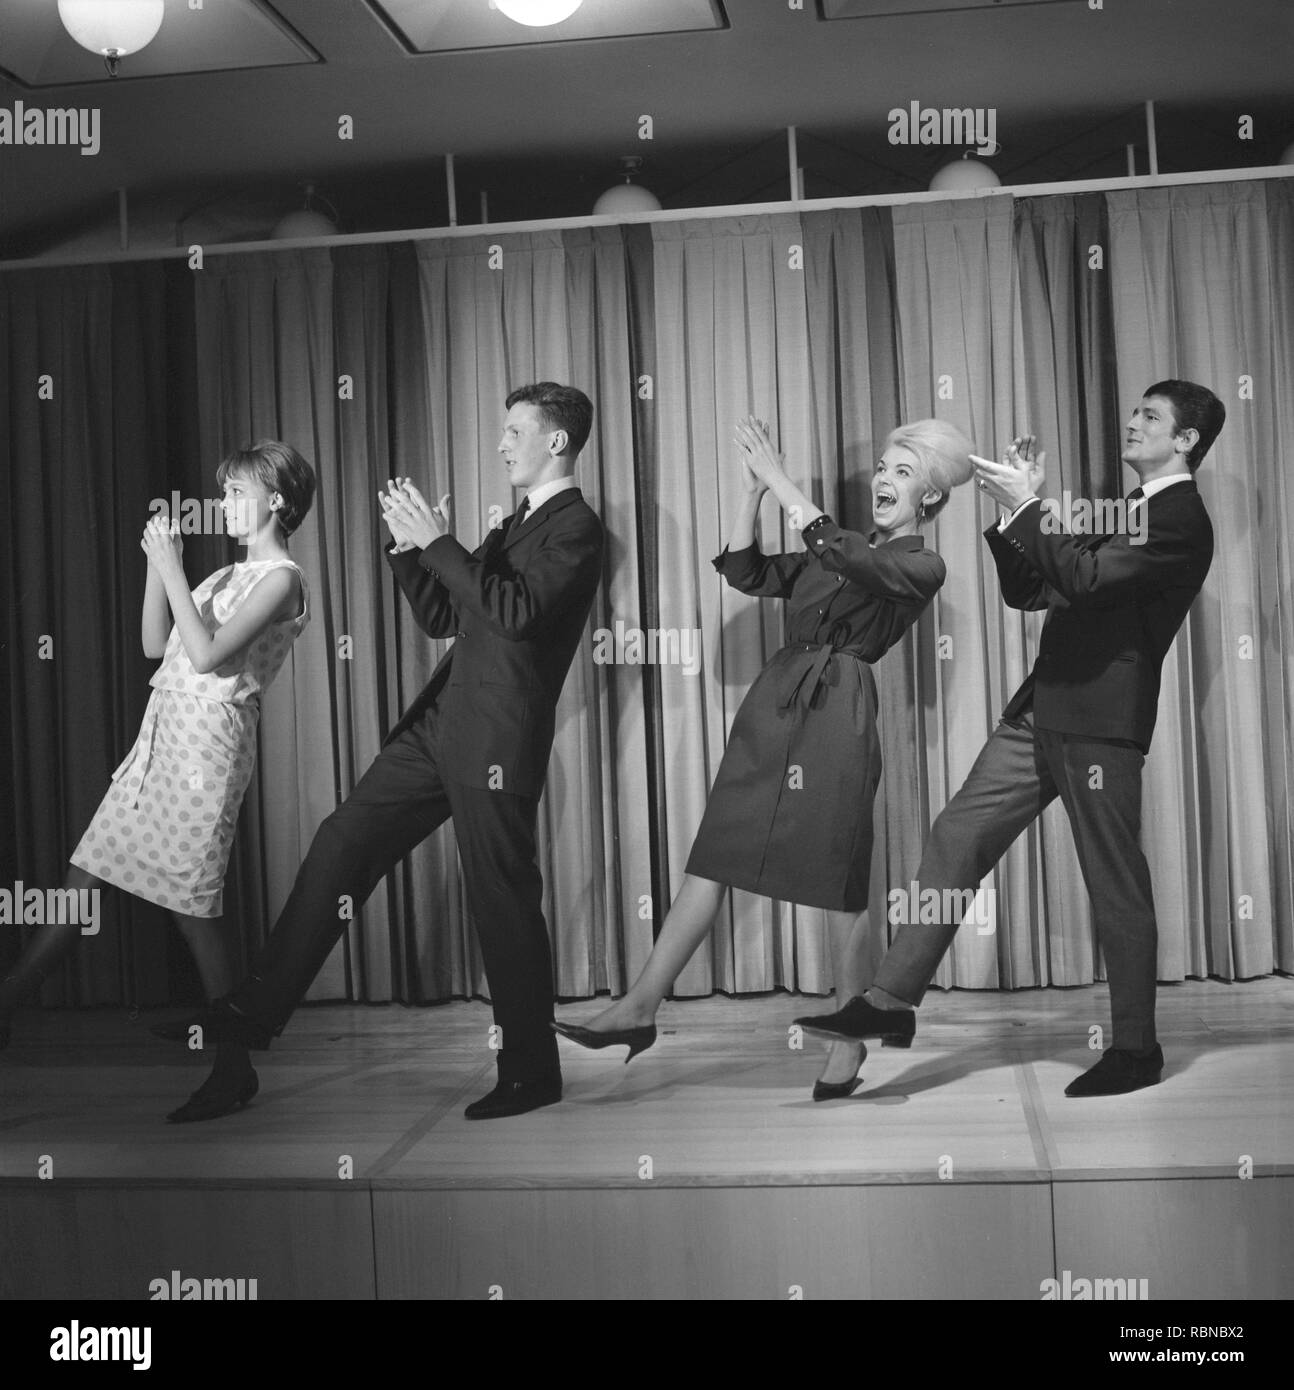 Dancing in the 1960s. The dance Hully Gully is being made popular and here are men and women dancing the new craze. Hully Gully was a type of unstructured line dance and consisted of a series of steps and was relatively simple and easy to execute. Hully Gully can be seen performed by actor John Belushi in the film Blues Brothers. Notice the typical BeeHive hairdo on the blonde girl. Stock Photo